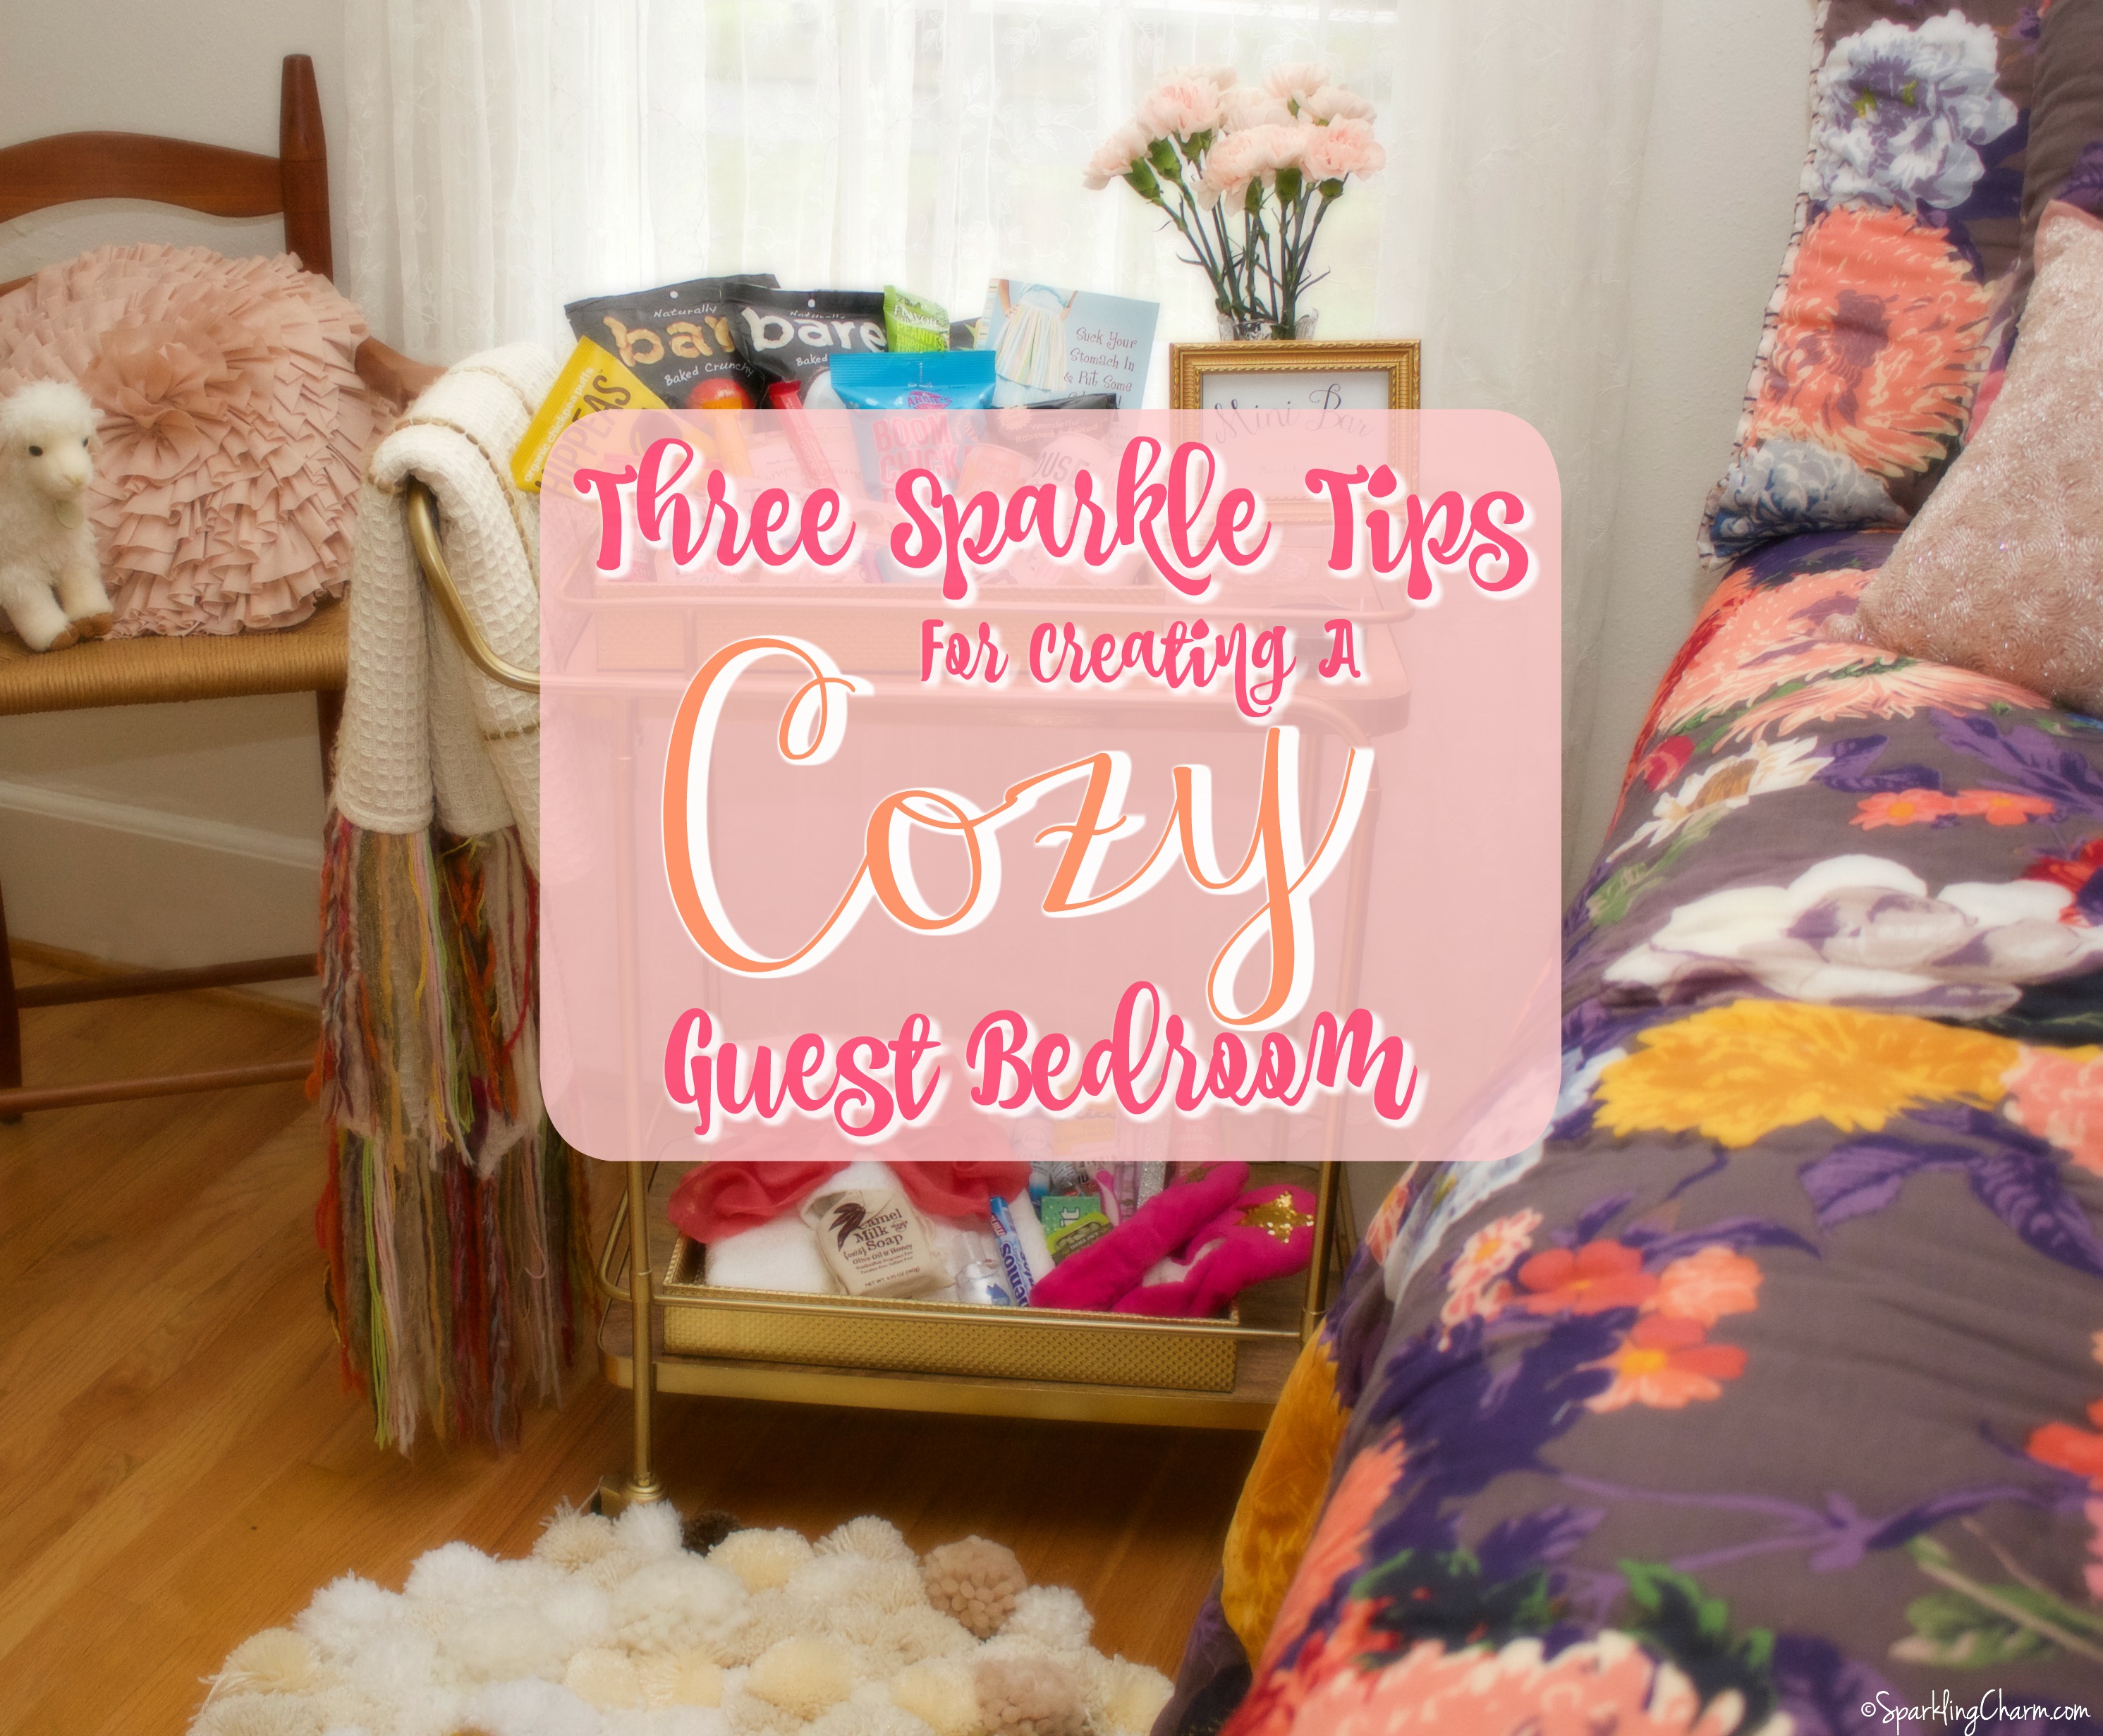 3 Sparkle Tips For Creating A Cozy Guest Bedroom (Free WiFi Passcode Printable)